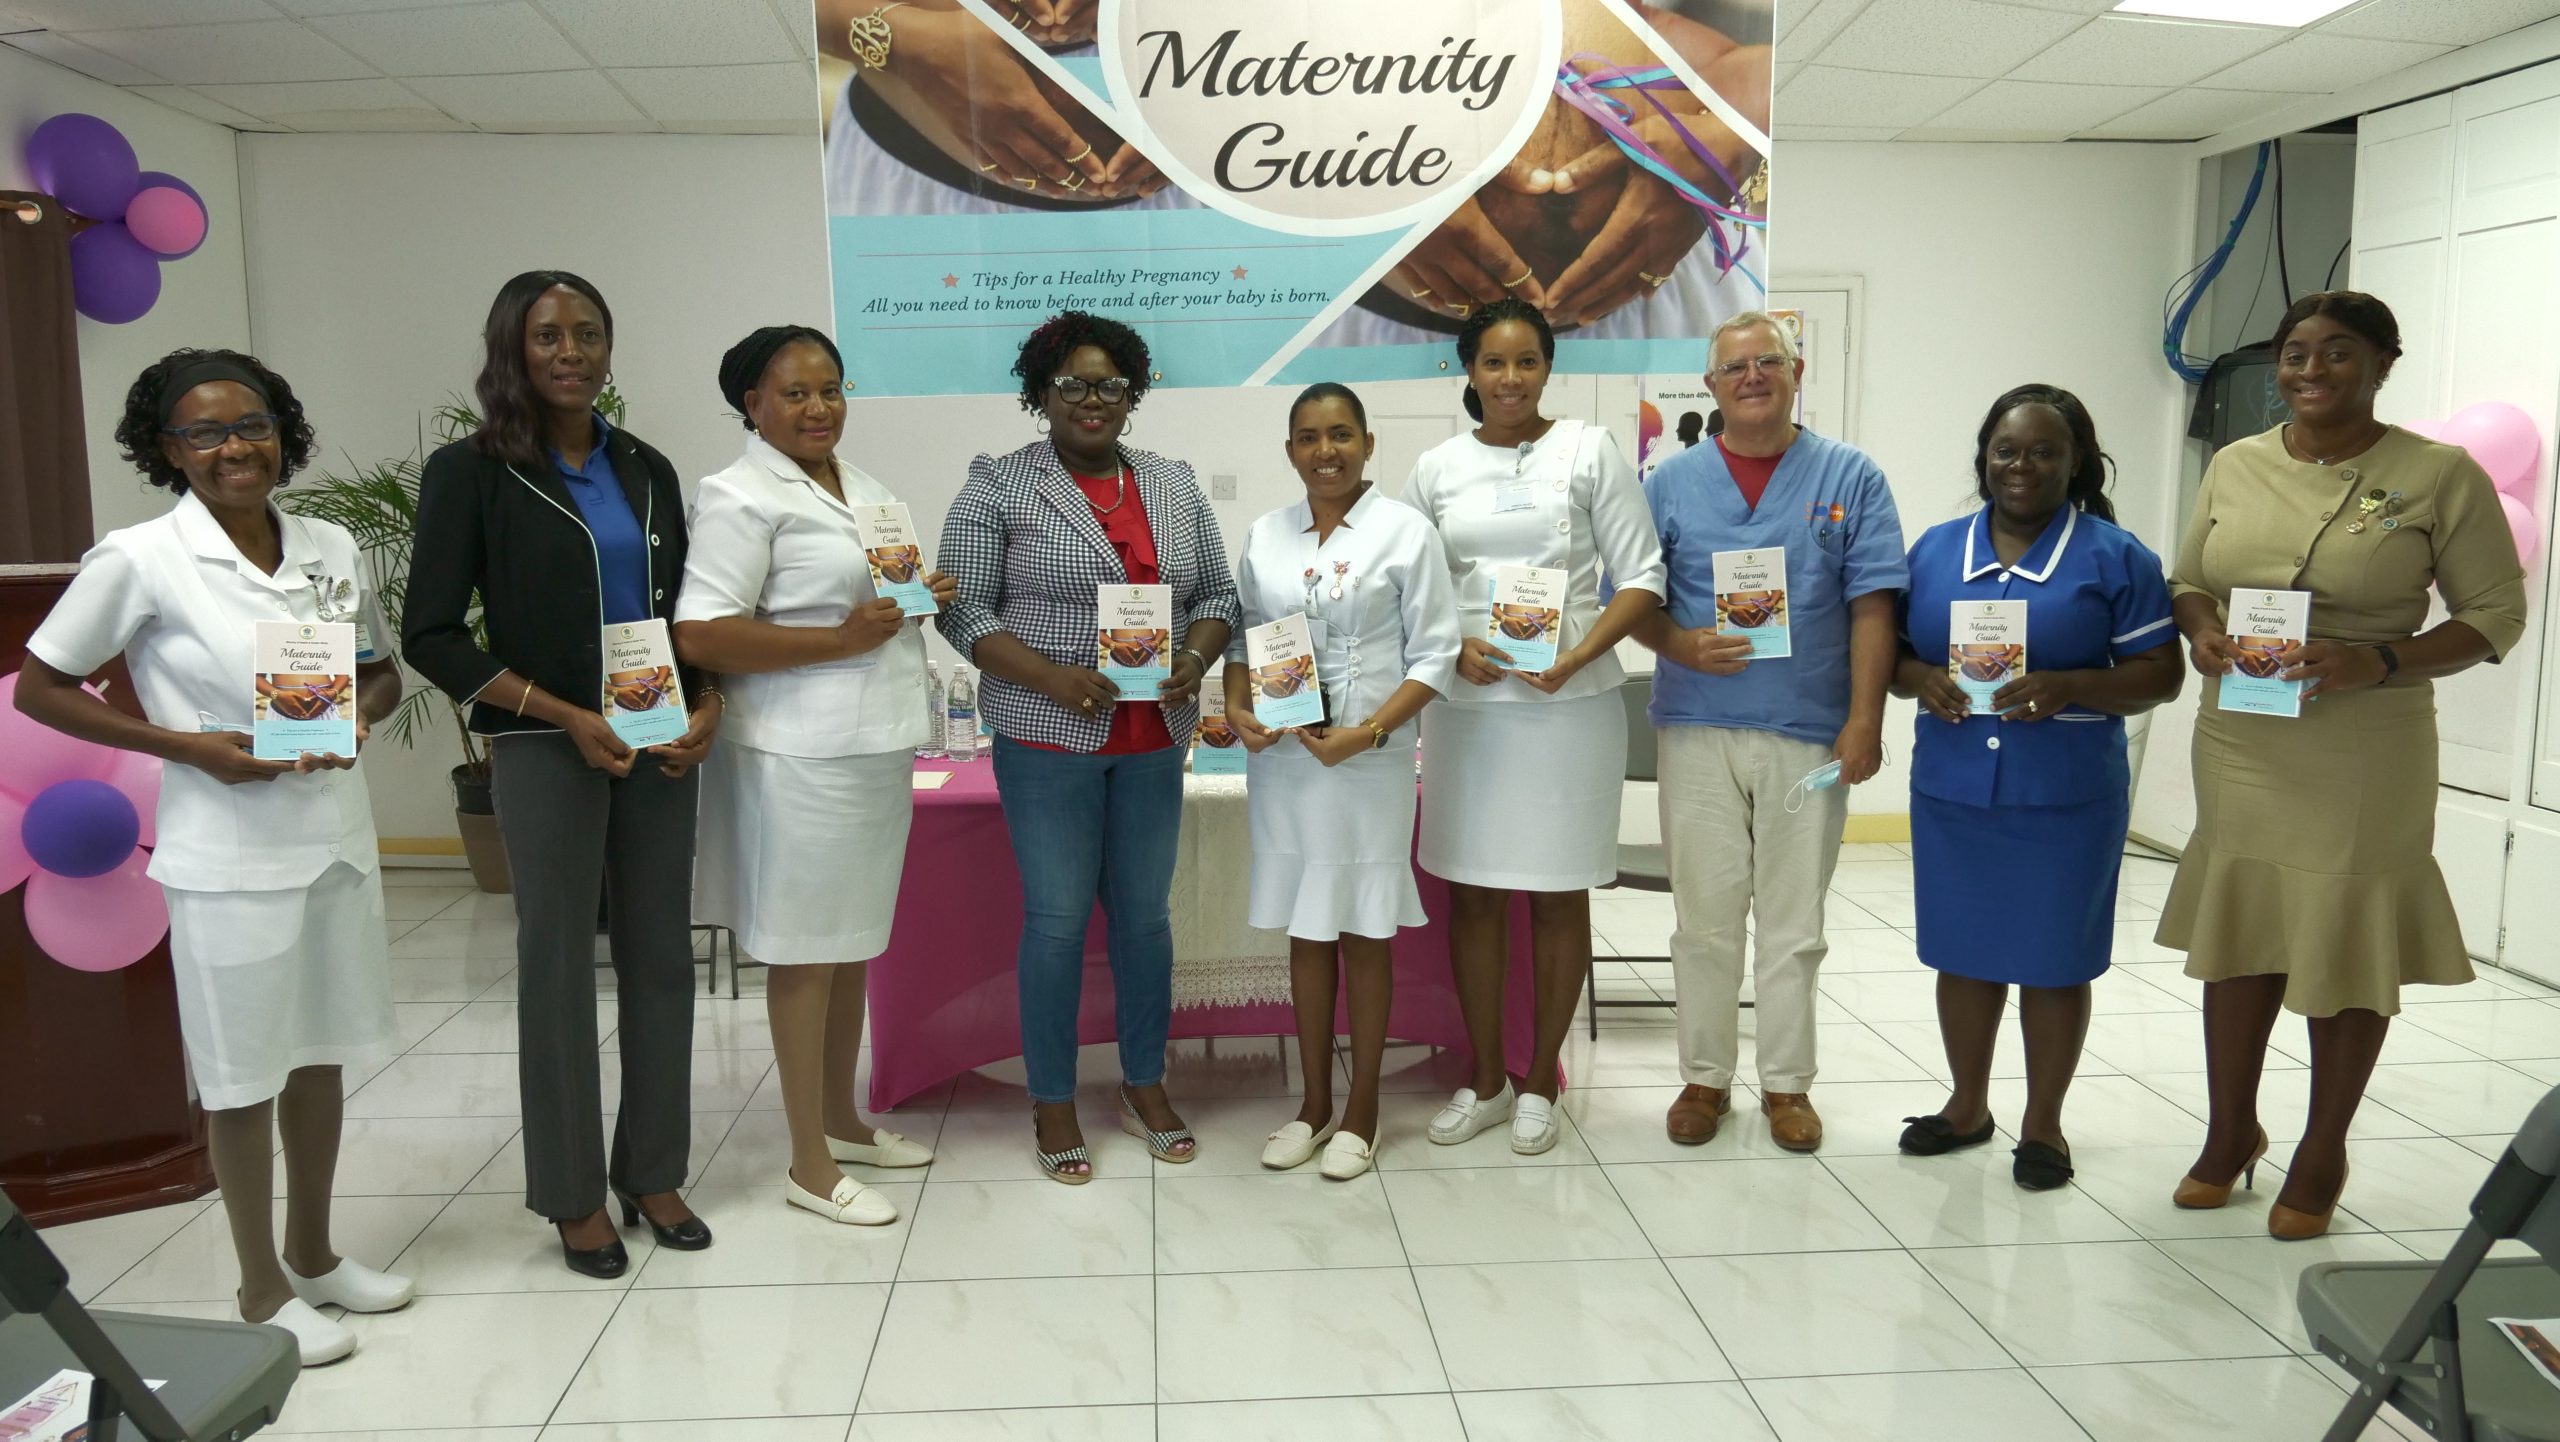 Health officials at the launch of the Ministry of Health and Gender Affairs Maternity Guide booklet on June 24, 2022, (L-R): Nurse Donna Hill in charge of the Brown Hill Health Centre; Ms. Shelisa Martin-Clarke, Permanent Secretary in the Ministry of Health; Nurse Heather David in charge of the Butlers Health Centre; Hon. Hazel Brandy-Williams, Junior Minister of Health; Nurse Chandreka Persaud-Wallace, Matron at the Alexandra Hospital; Nurse Dhaima Golding, Assistant Matron; Dr. William Stones, Obstetrician-Gynaecologist; Kenisha Sargeant, Community Health Worker at the Charlestown Health Centre; and Nurse Deslyn Tyson-Whyte, Acting Coordinator of Community Nursing Services in the Ministry of Health